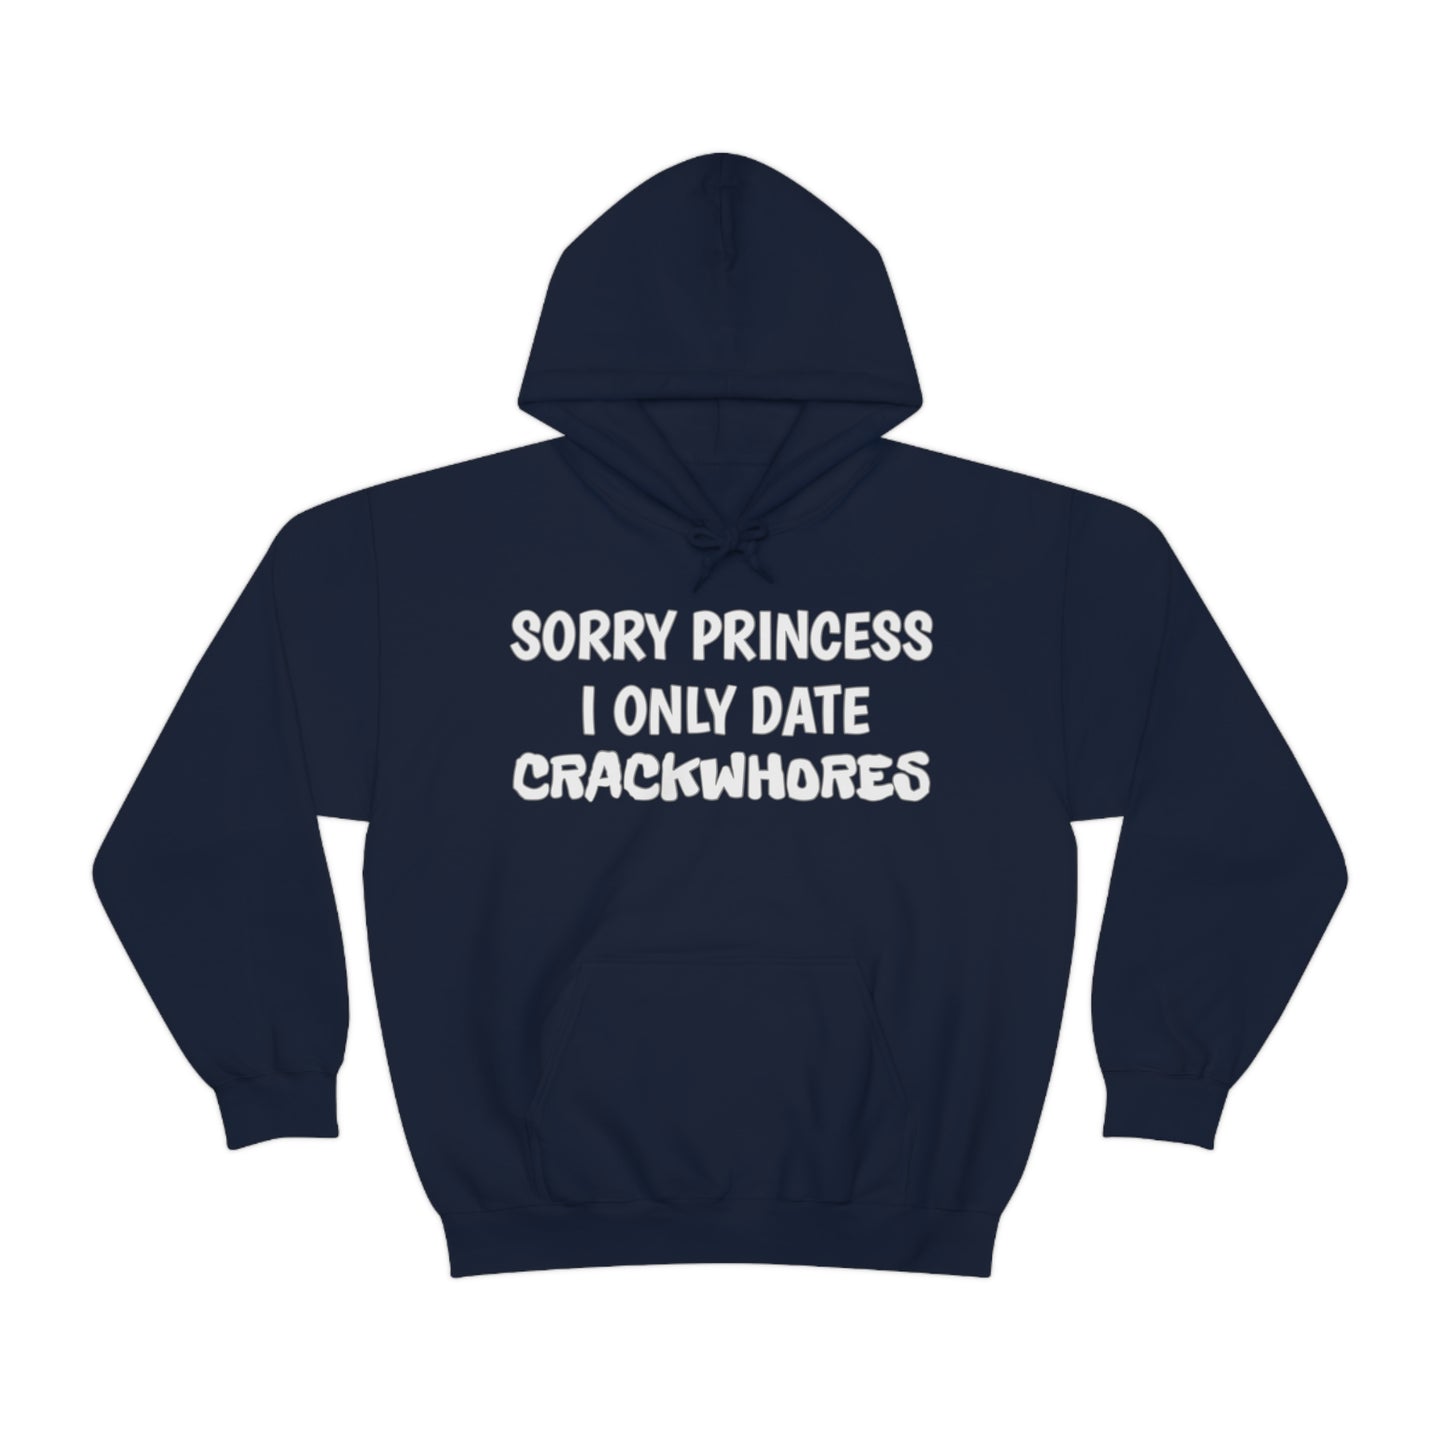 "Sorry Princess I Only Date Crackwhores" Hoodie